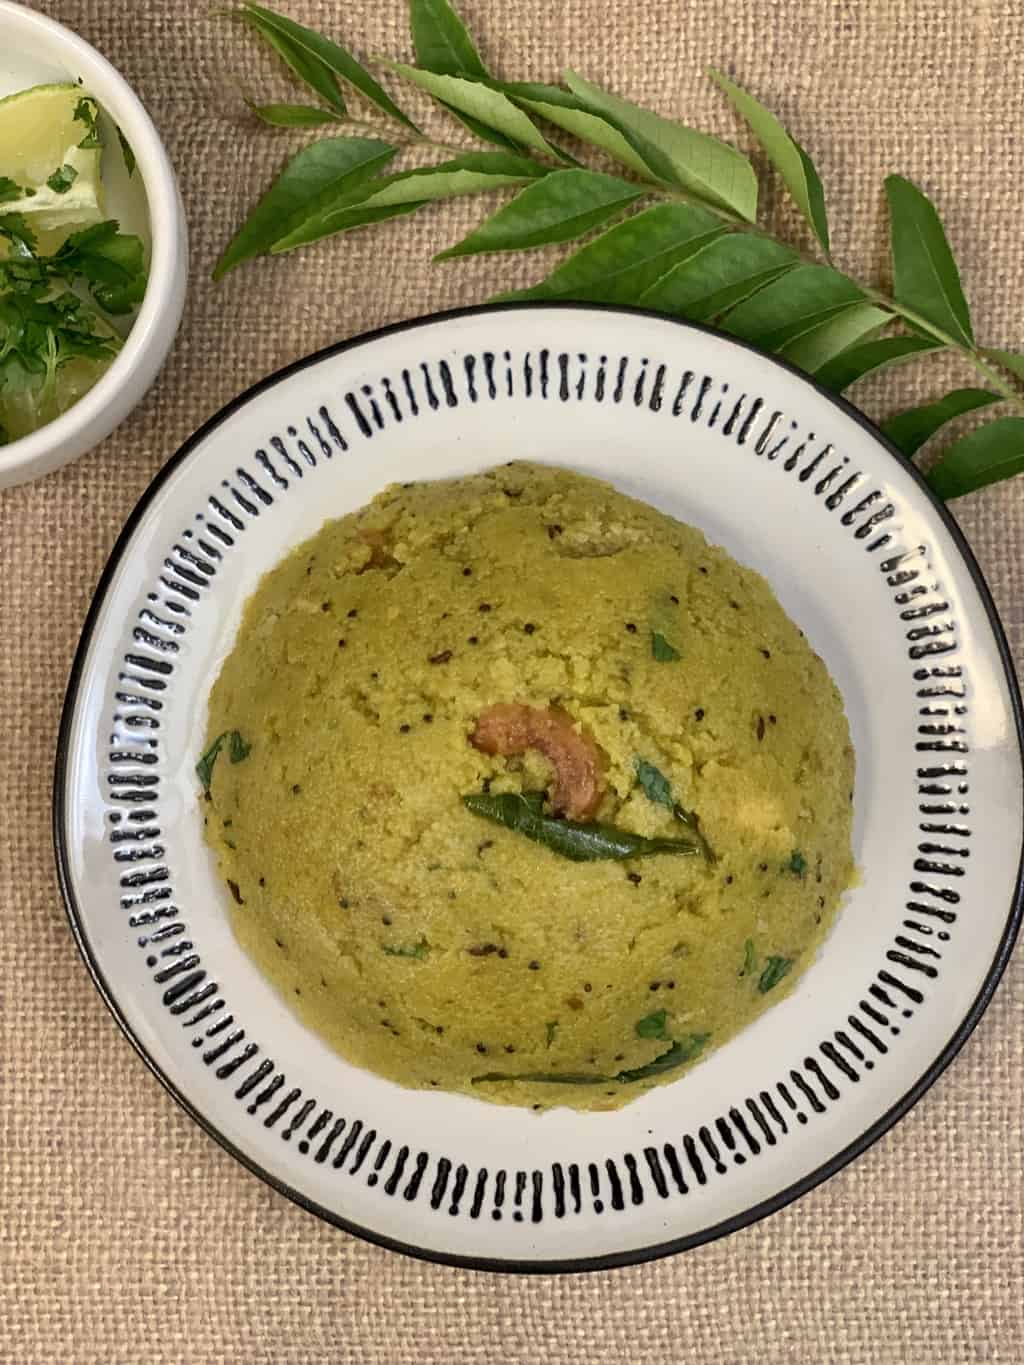 Easy and healthy breakfast dish prepared with rava / semolina ,spinach and tomato as main ingredients. It is basically another variety of popular rava upma recipe with spinach and tomato flavour.